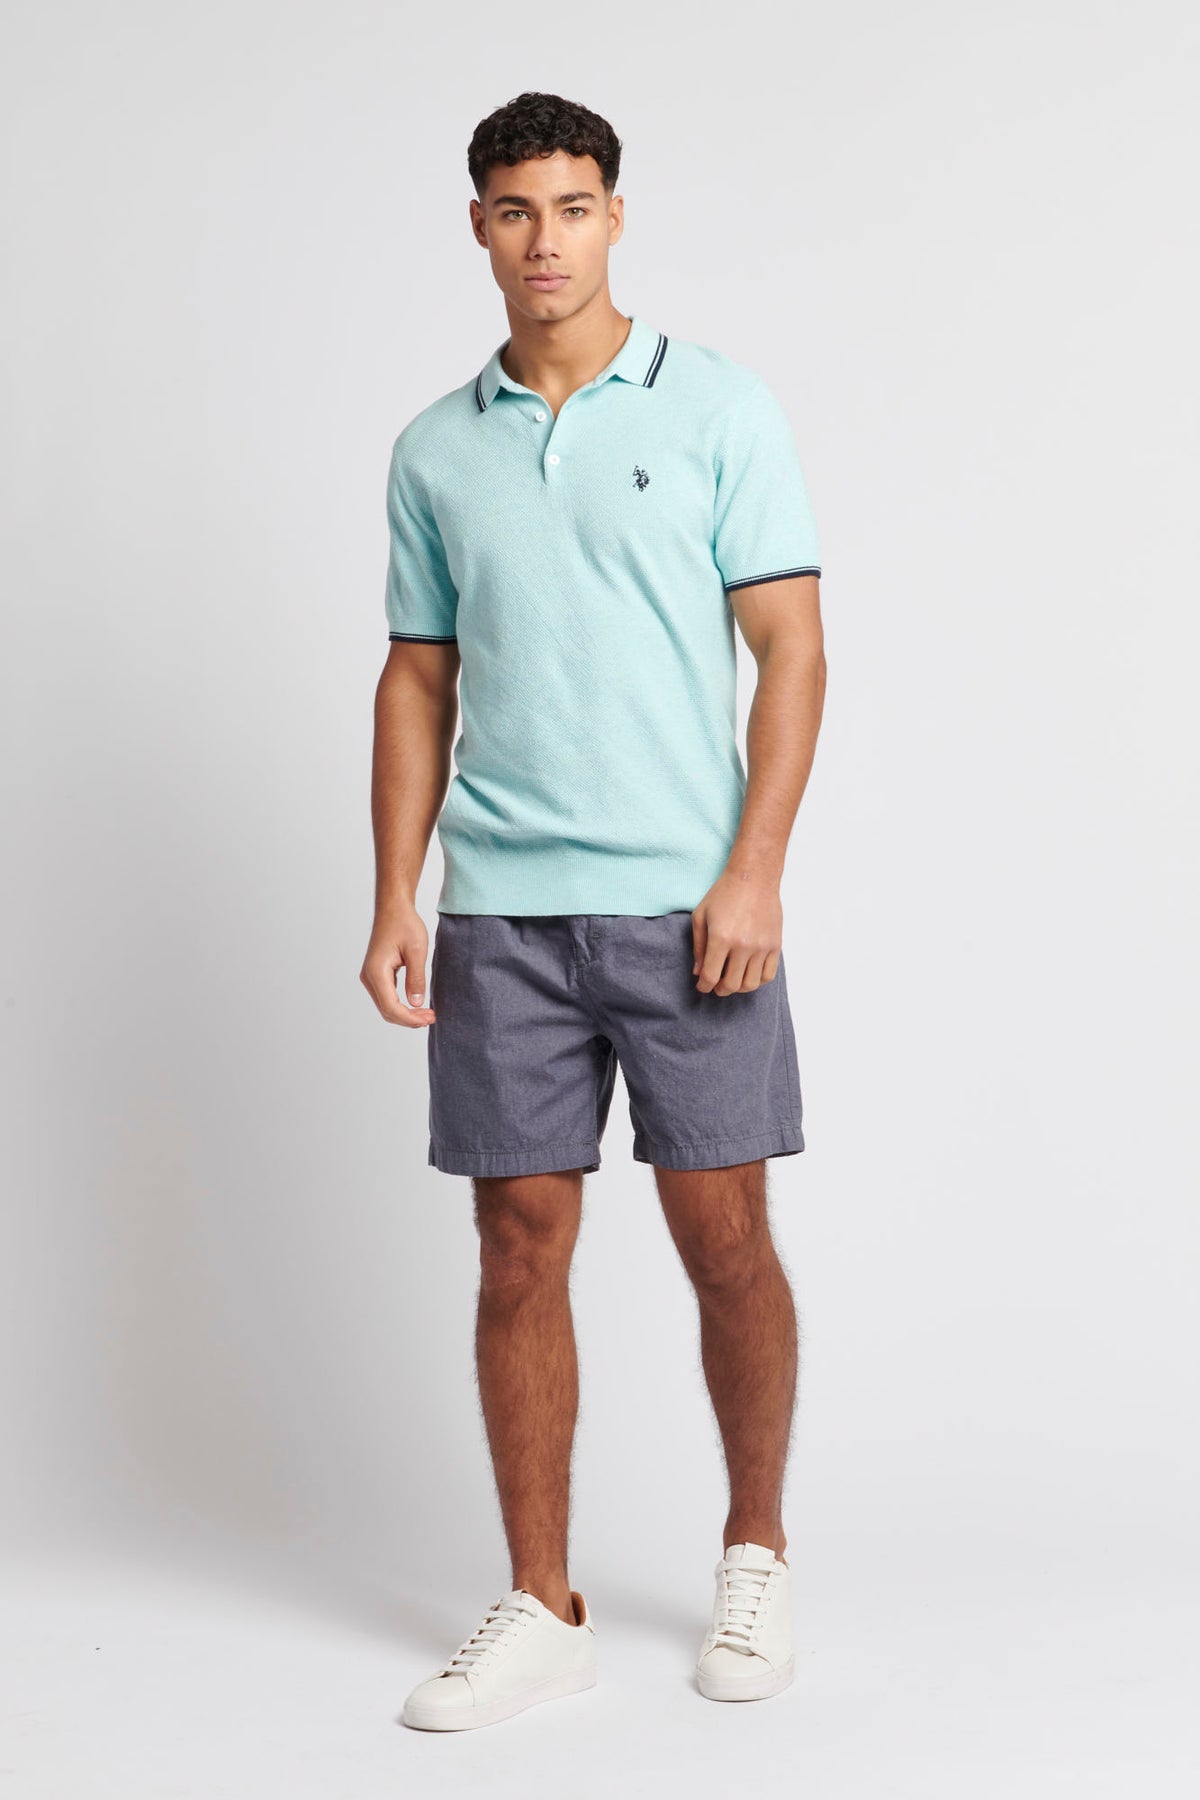 Mens Tipped Collar Textured Polo Shirt in Atomizer Marl